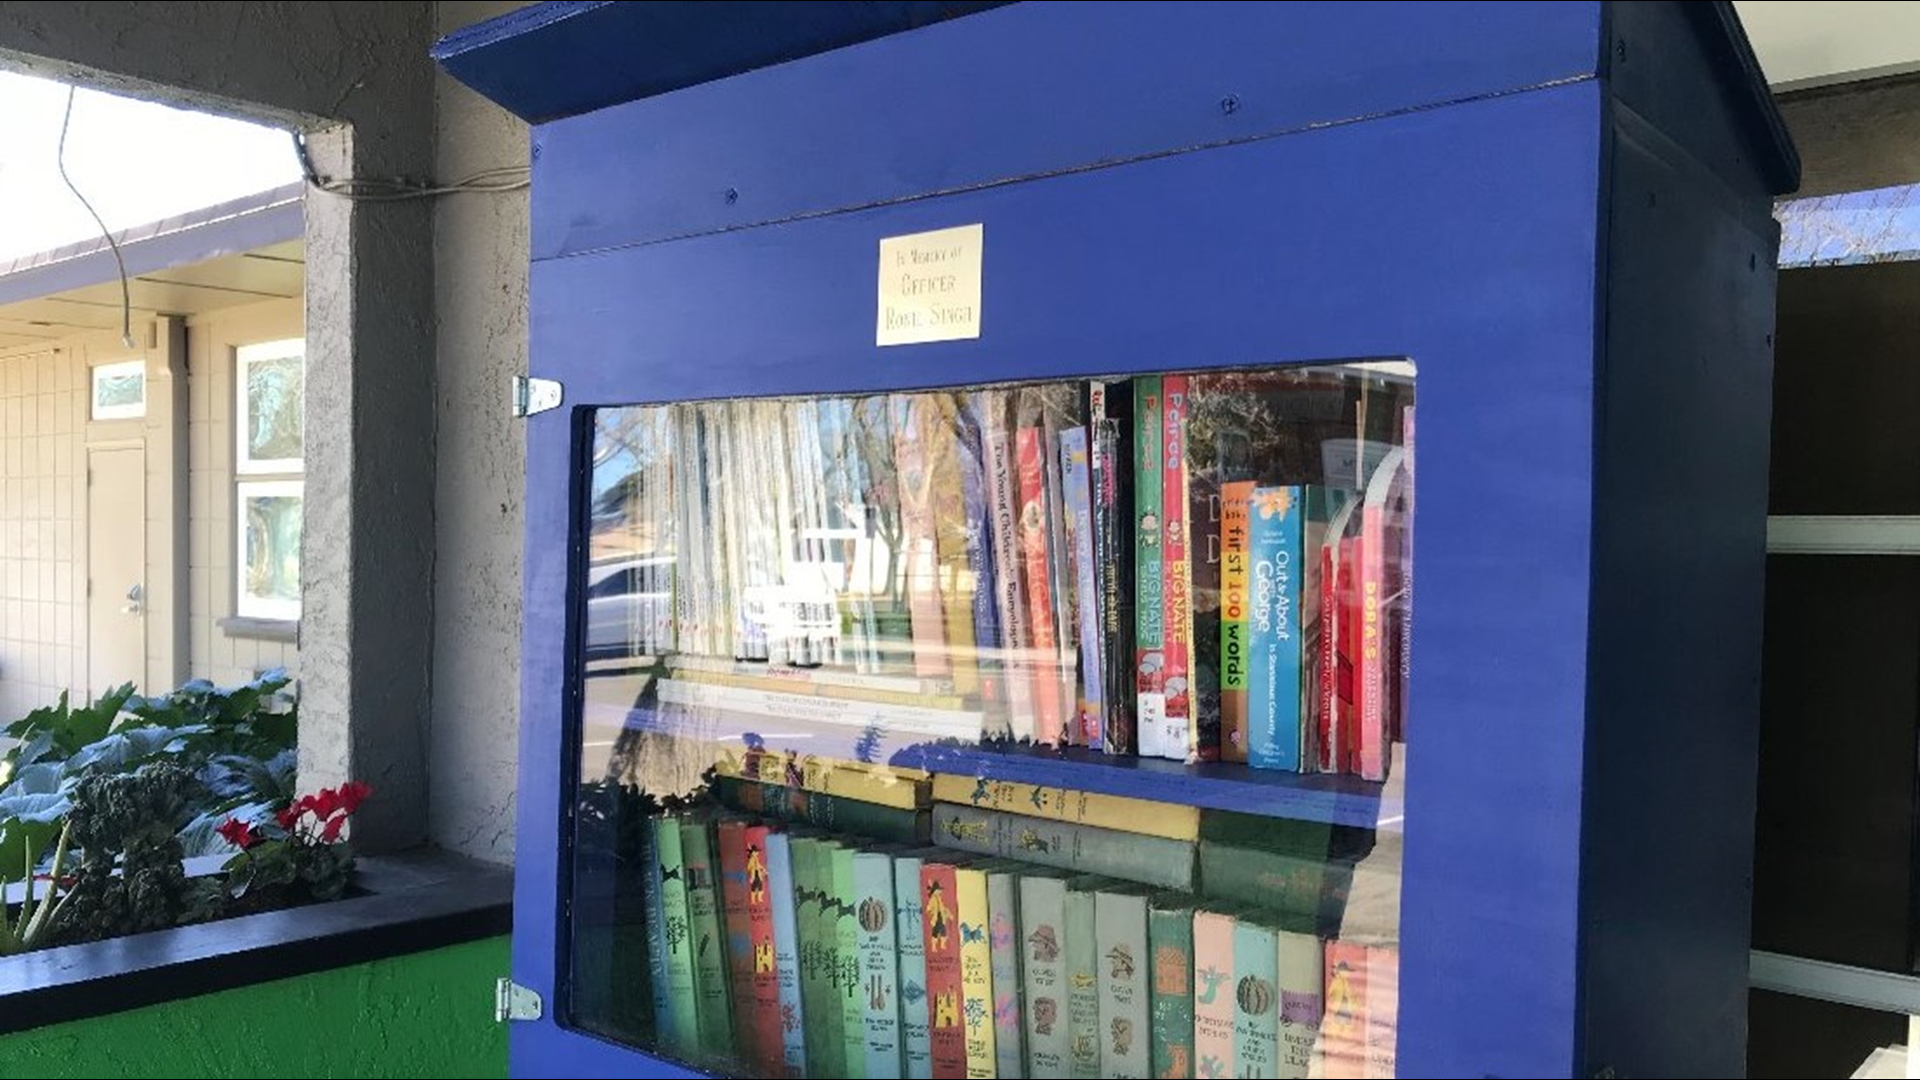 The Newman community has found a new way to honor fallen Cpl. Ronil Singh. A free lil’ library was created in front of the Modern by Design gift shop, which is located right next door to the Newman Police Department.